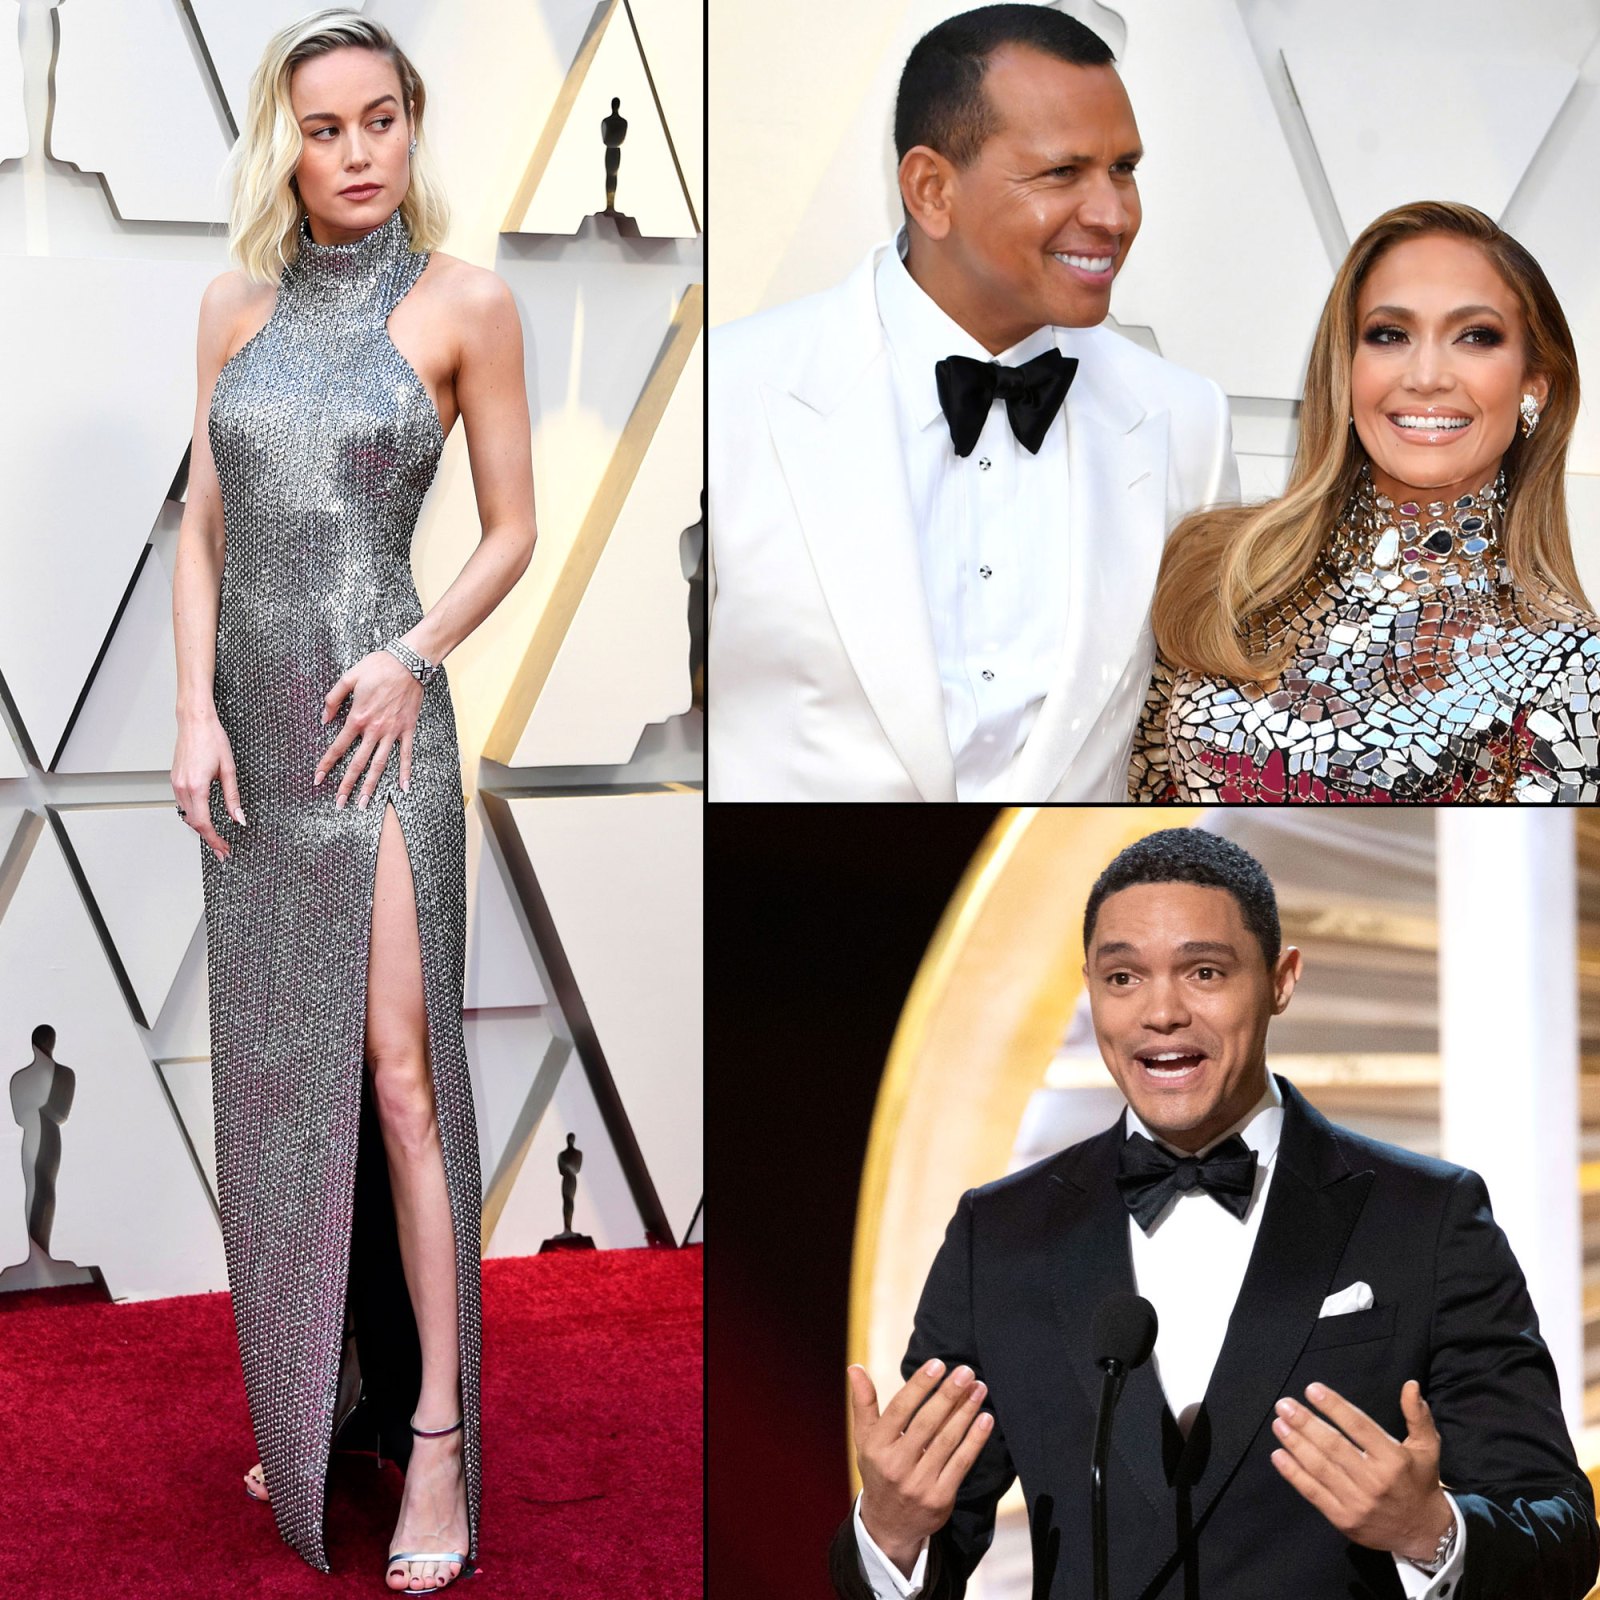 Oscars 2019: What You Didn’t See on TV